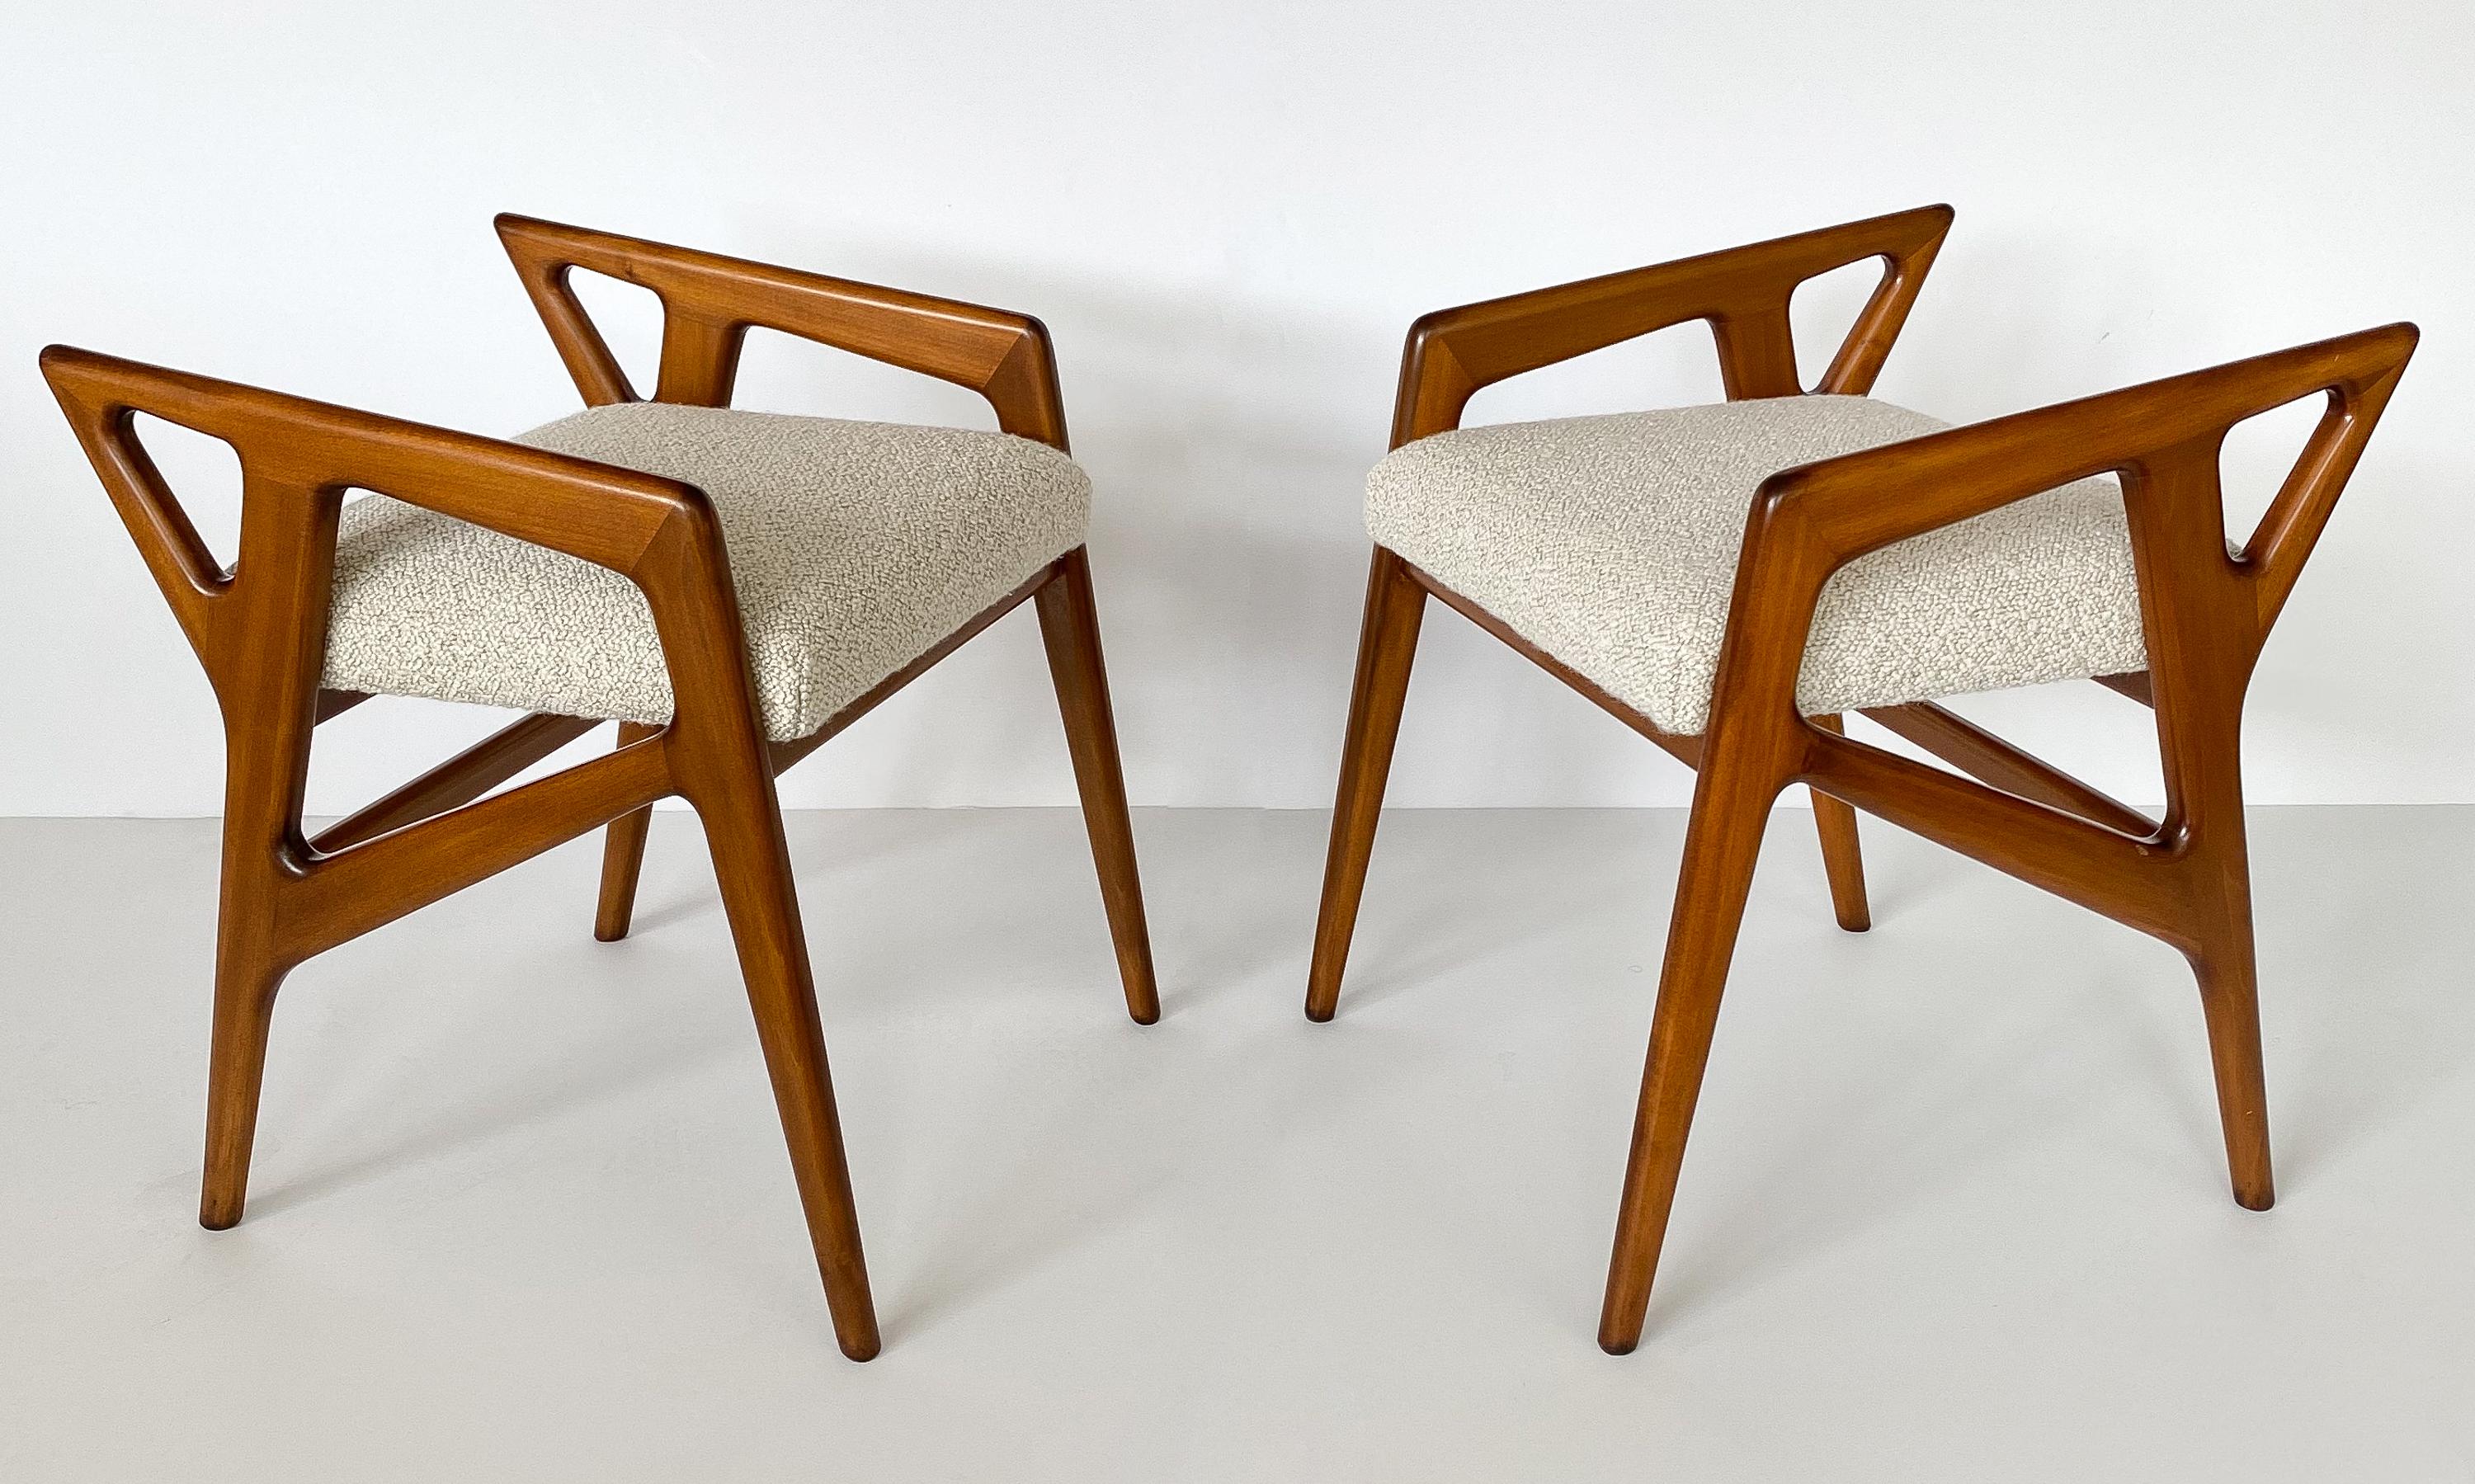 Pair of sculptural carved solid Italian walnut stools by Gio Ponti, circa 1950s. Newly upholstered in a two-toned taupe and cream textural bouclé fabric by Pierre Frey. Angular walnut frames are newly refinished. New cushions. A fabric swatch is